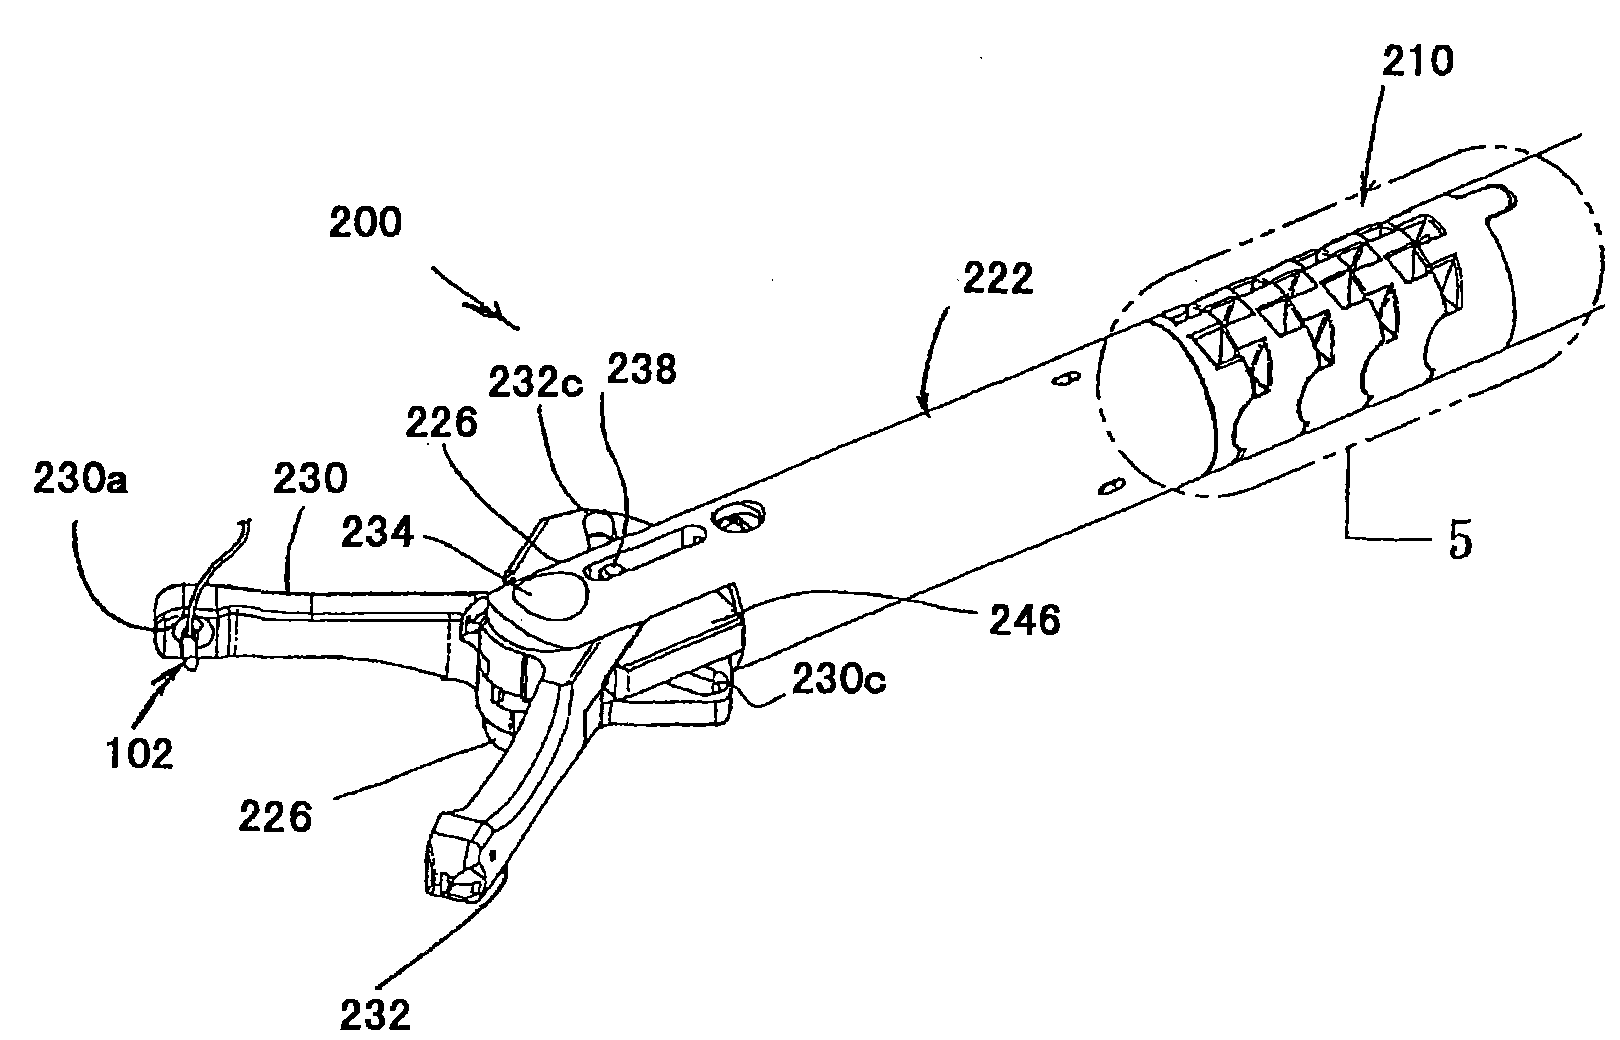 Endoscope sewing device